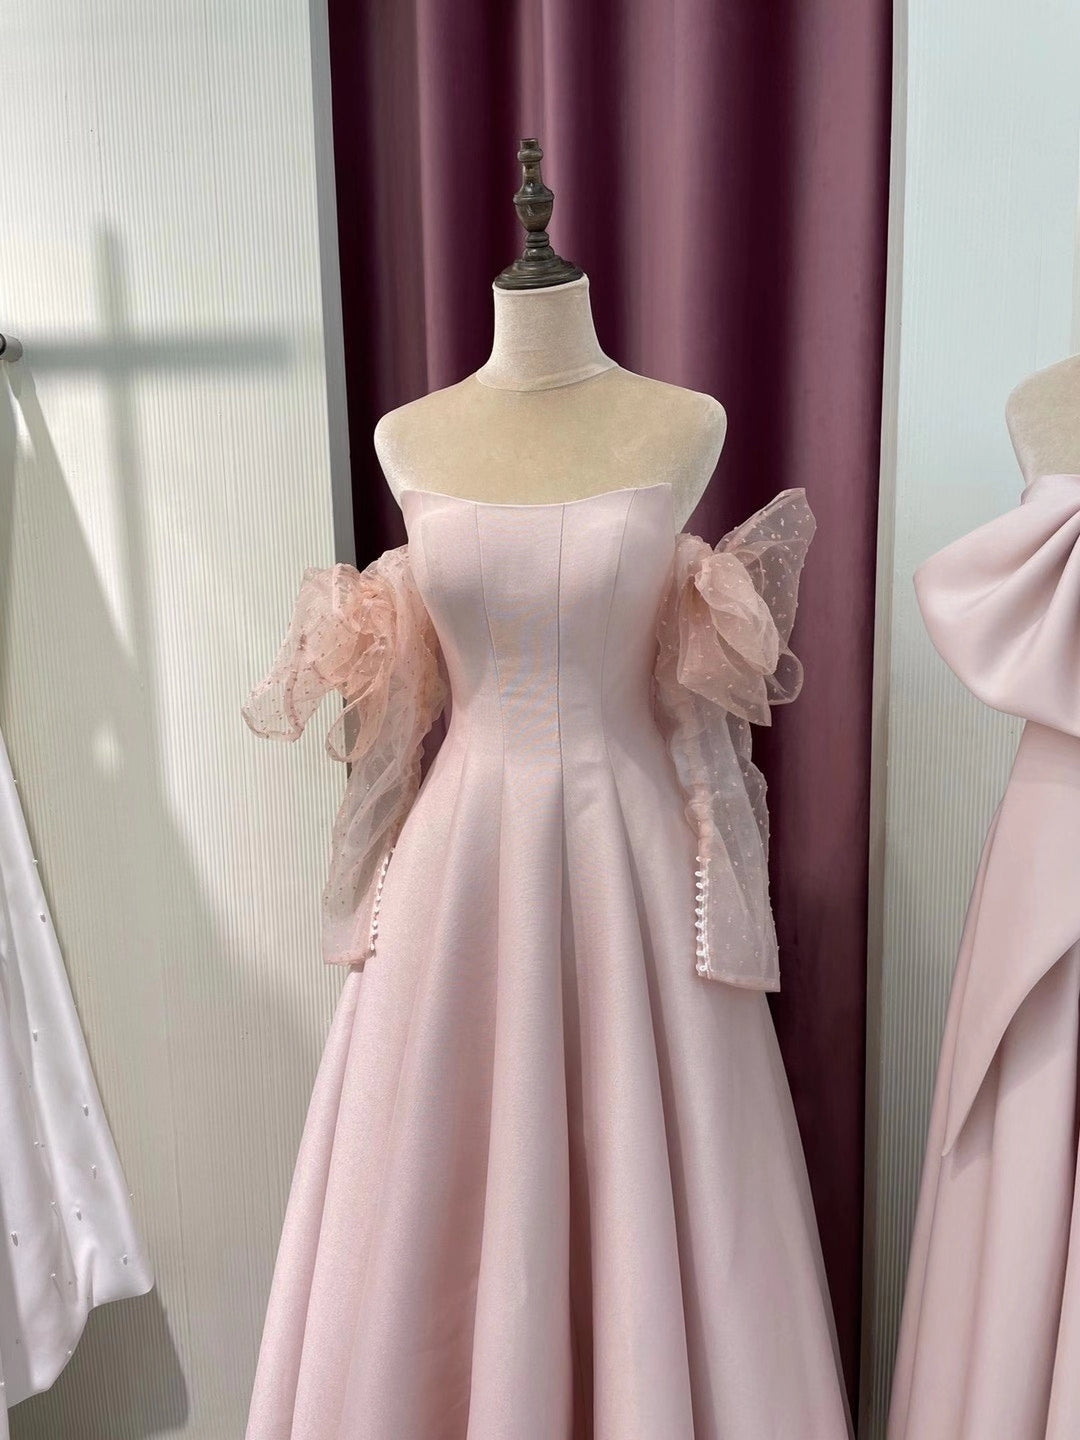 Lovely Pale Pink Satin Long A-line Prom Dresses, 2021 Prom Dresses, Cheap Prom Dresses